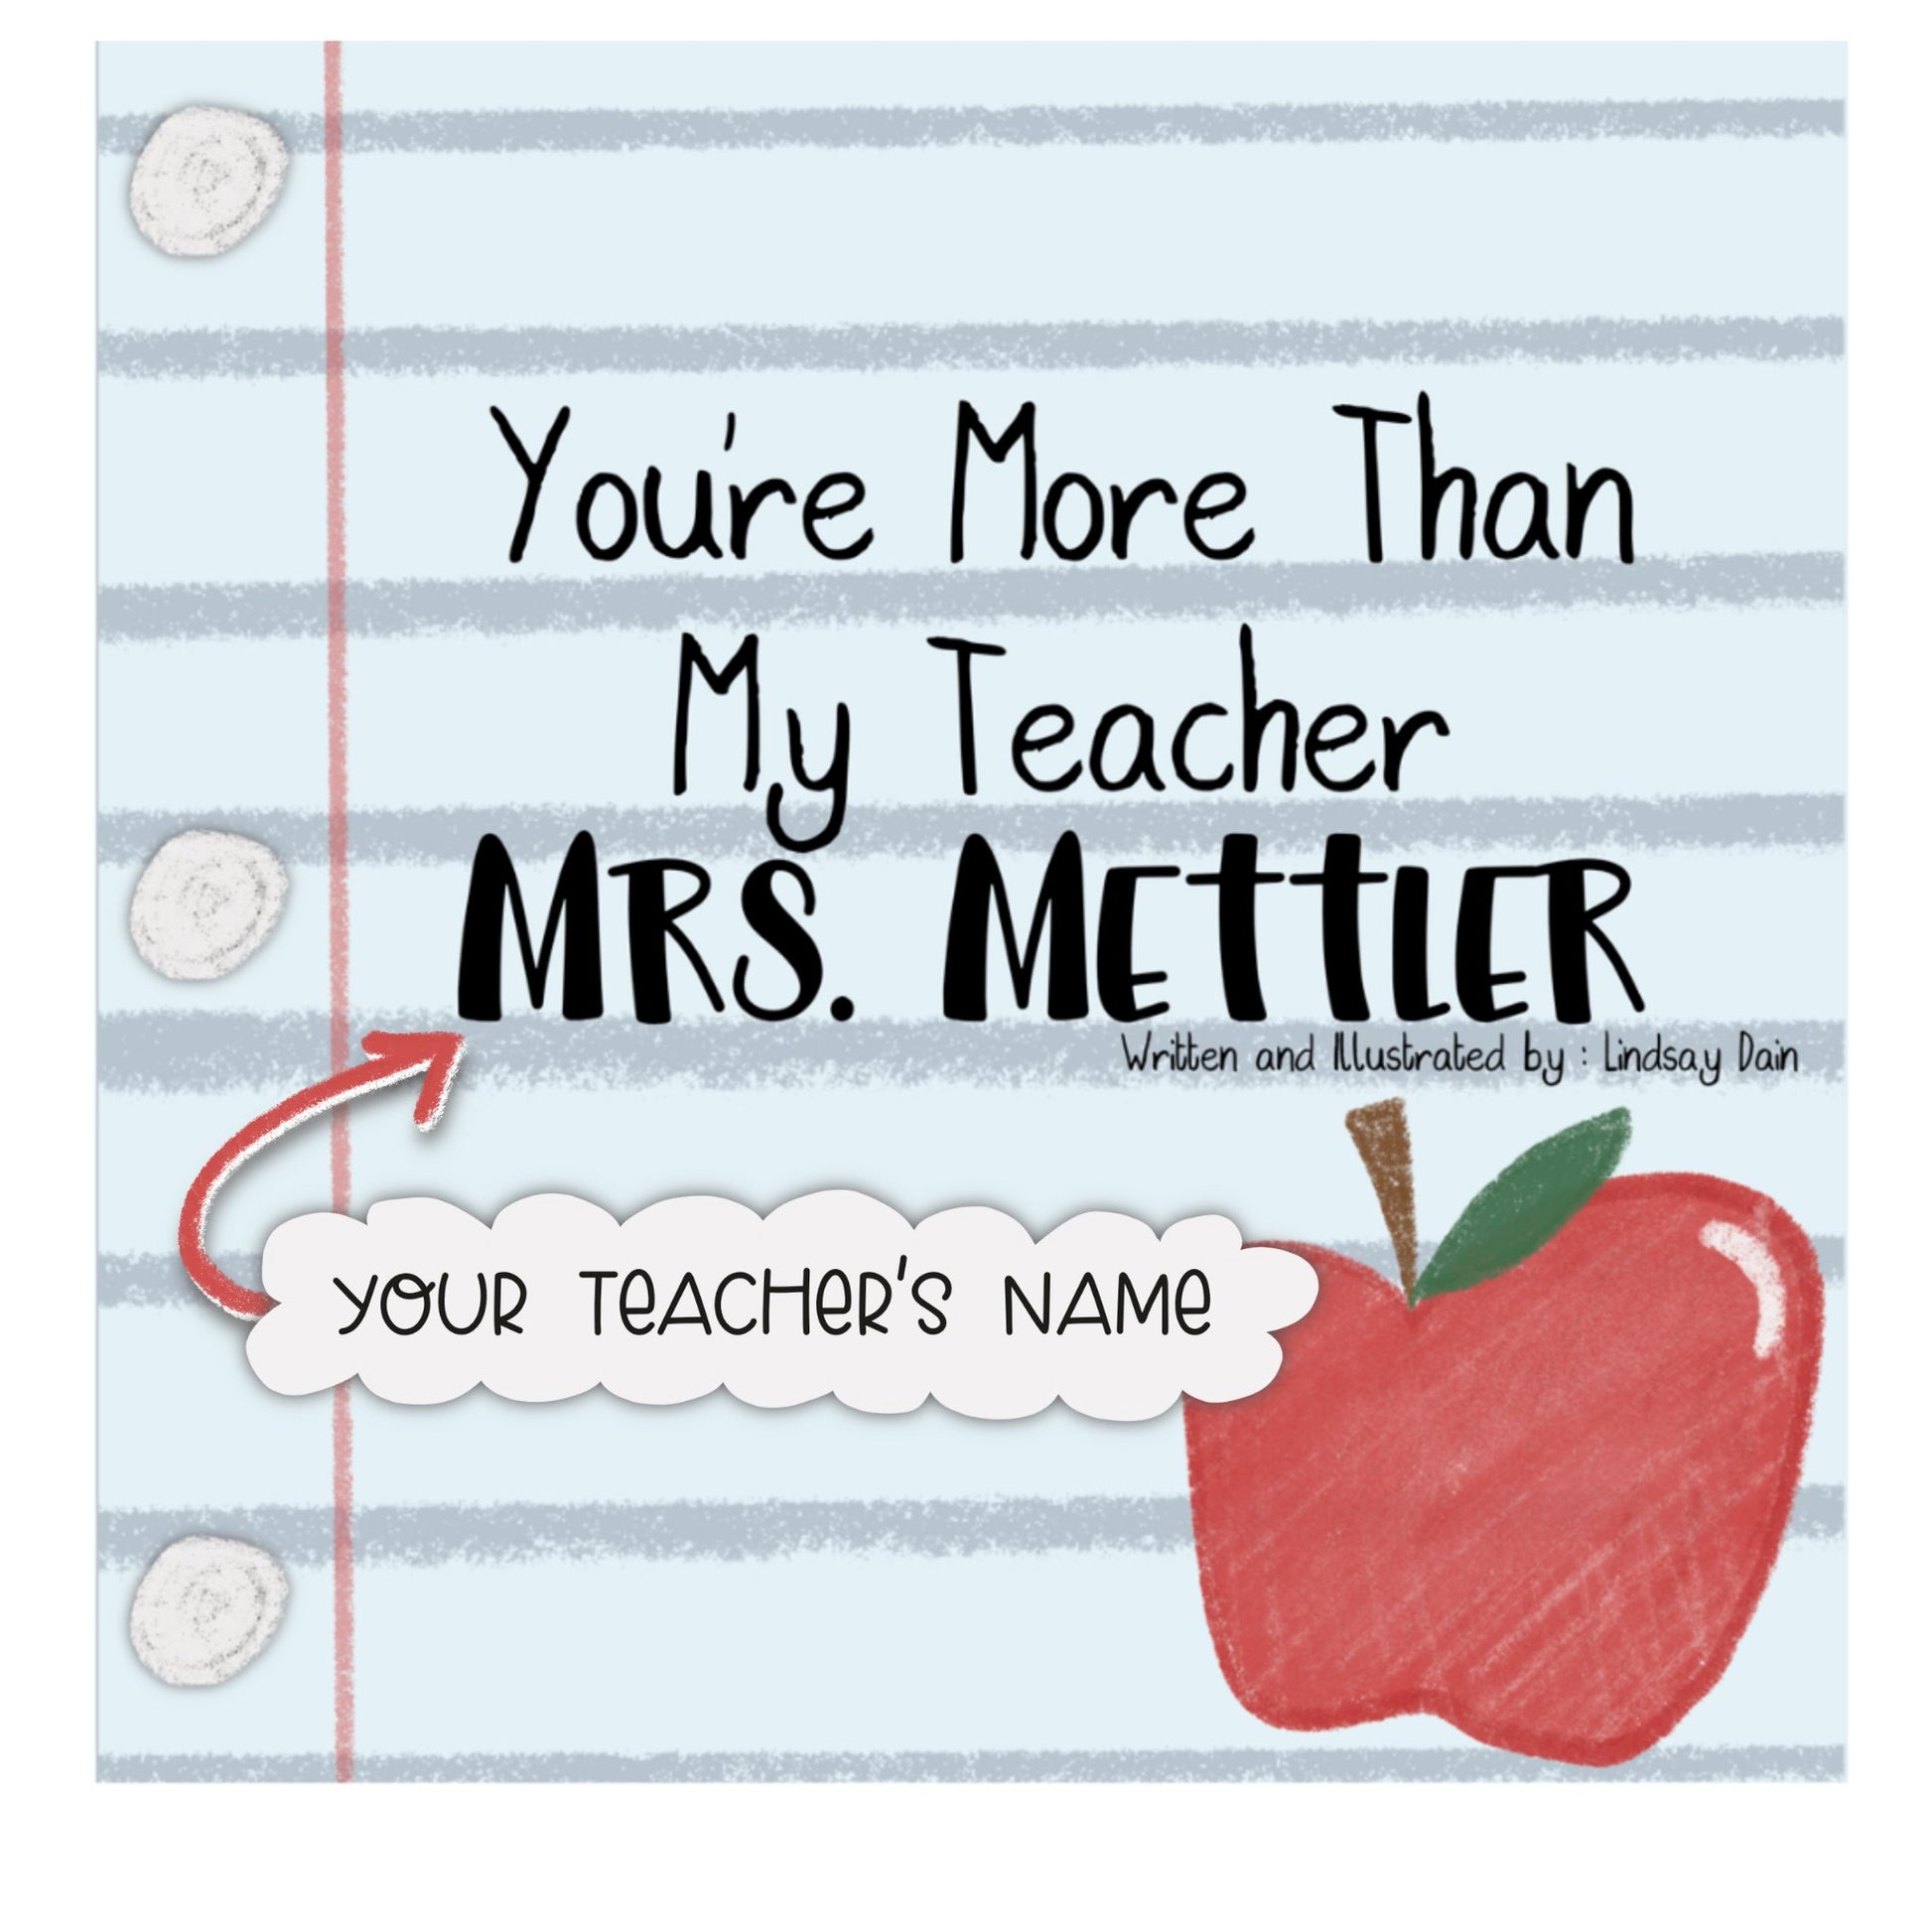 Gift certificate cover art for the self-published book called “You’re More Than My Teacher” highlighting the option to add the teacher’s name on the cover.